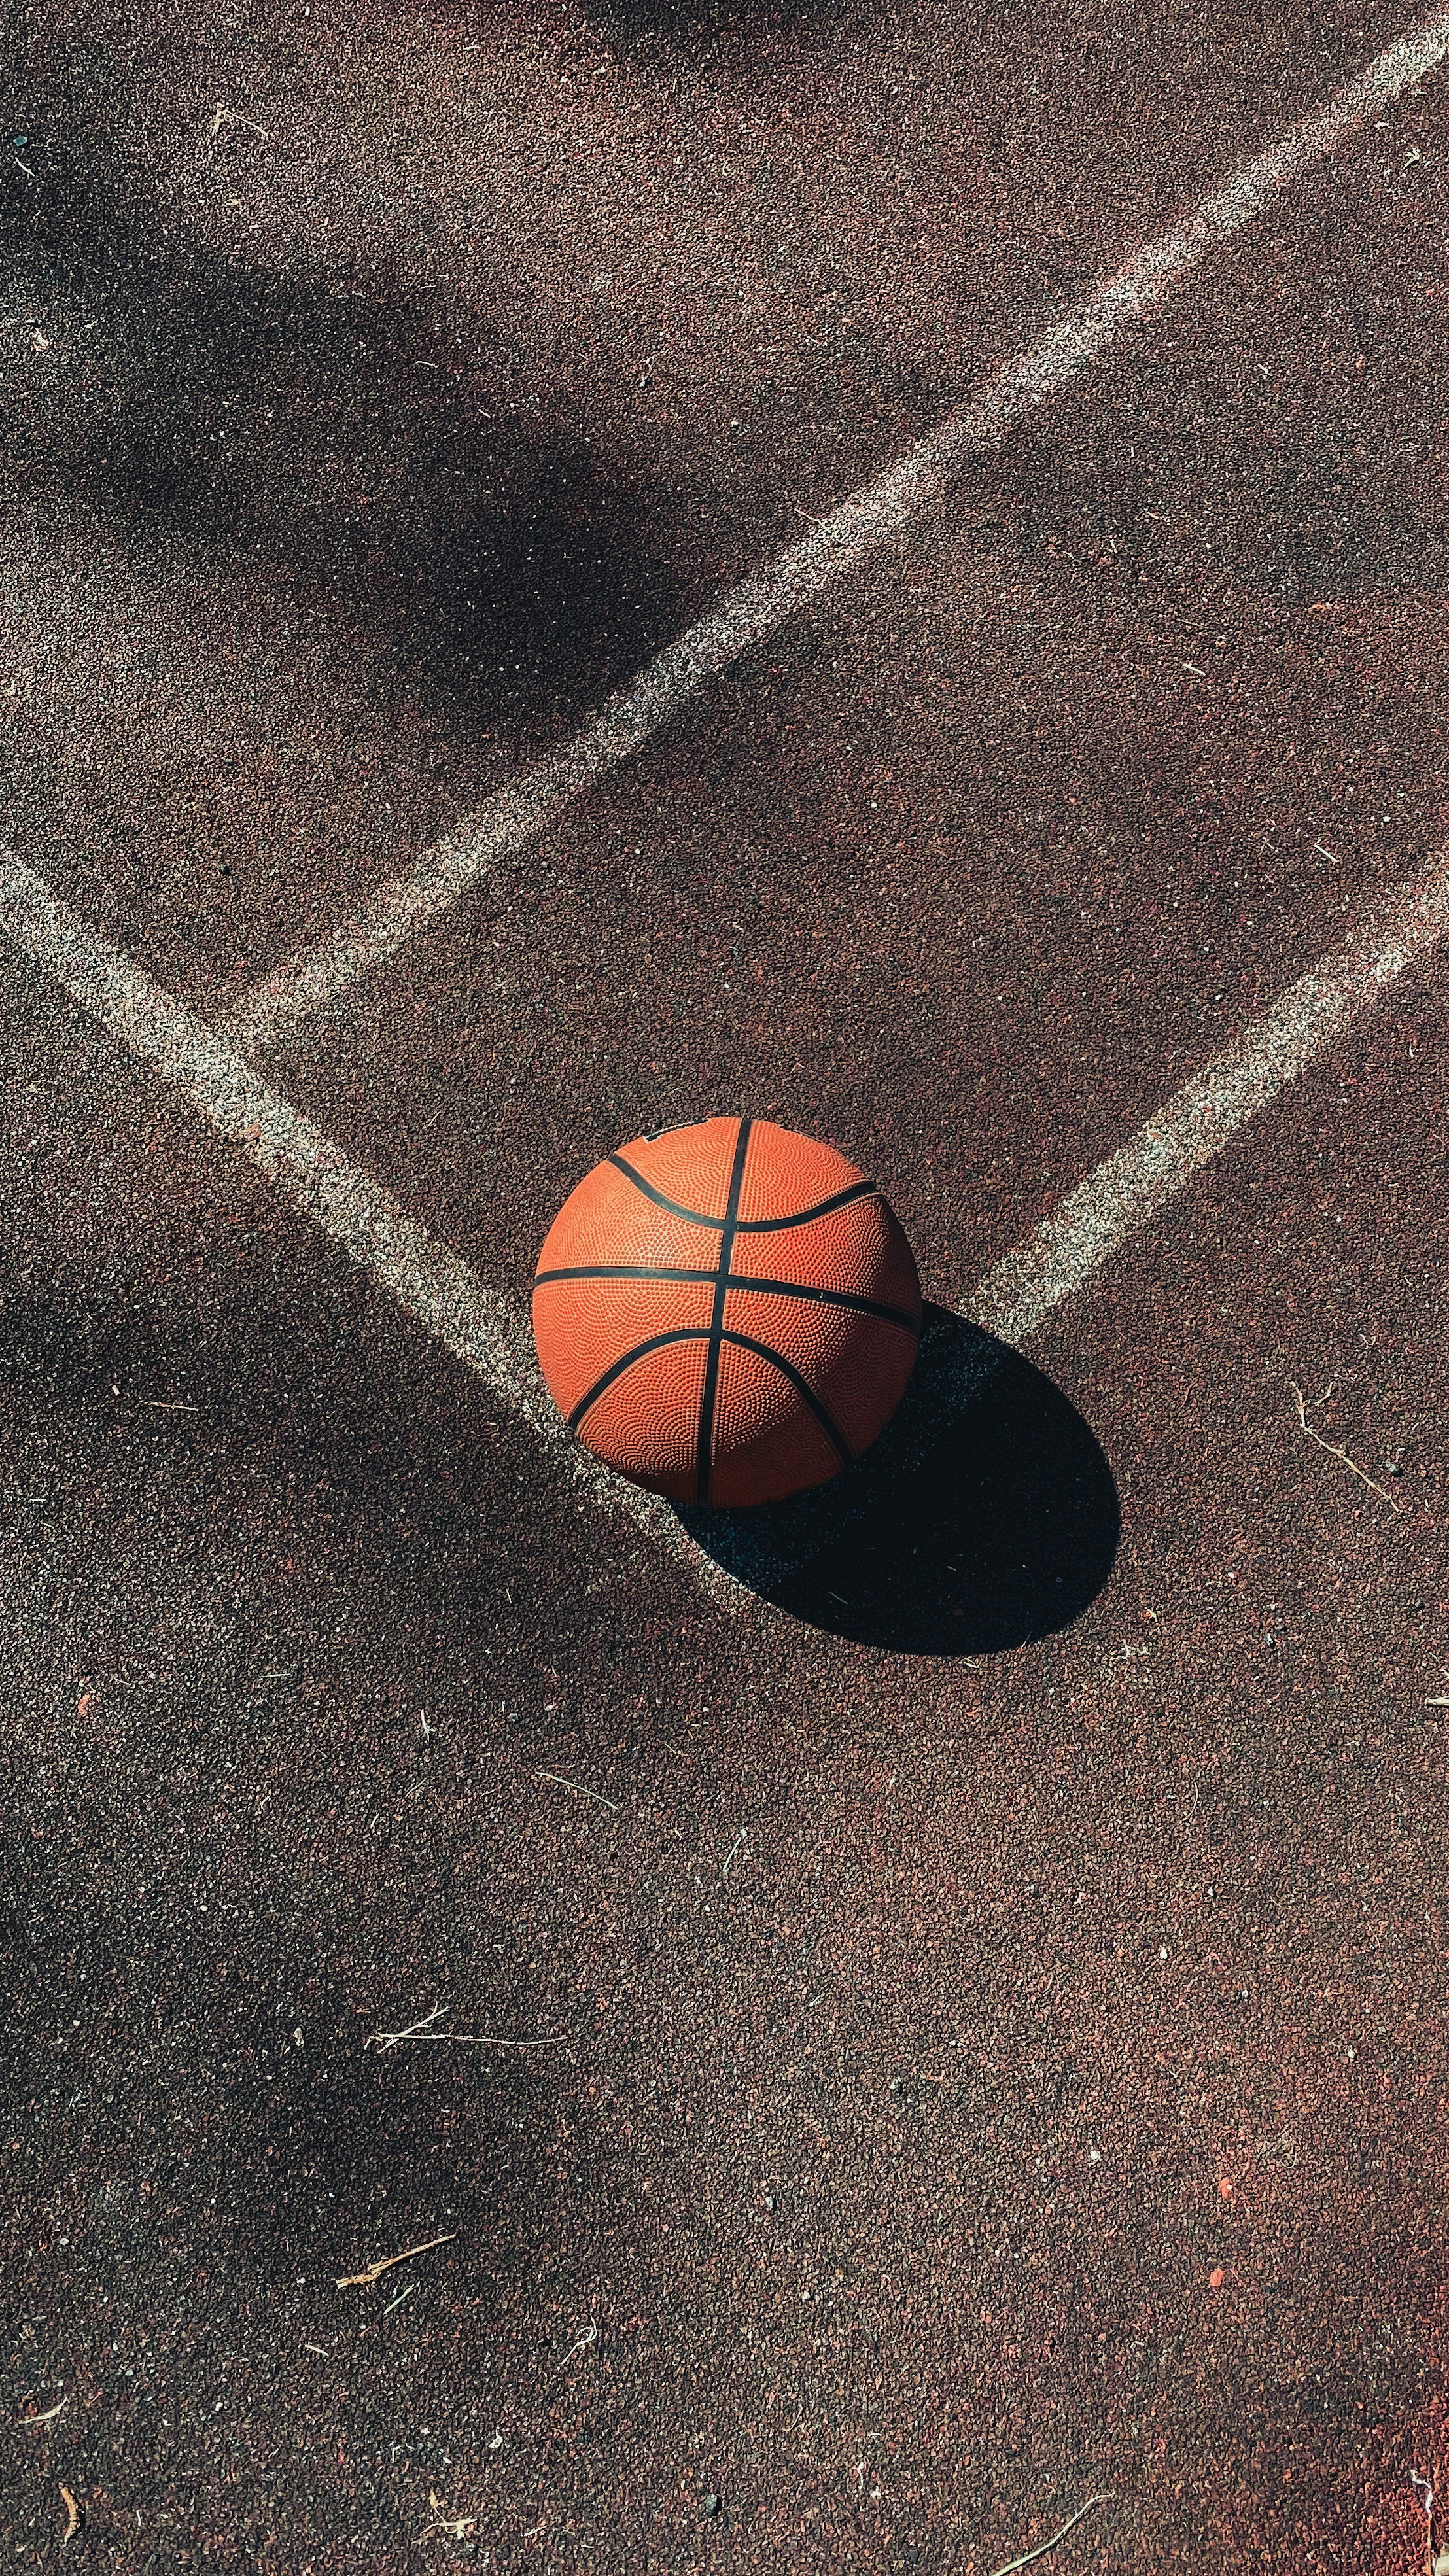 Beyond the Basket: Life Lessons Learned Through Basketball part 2